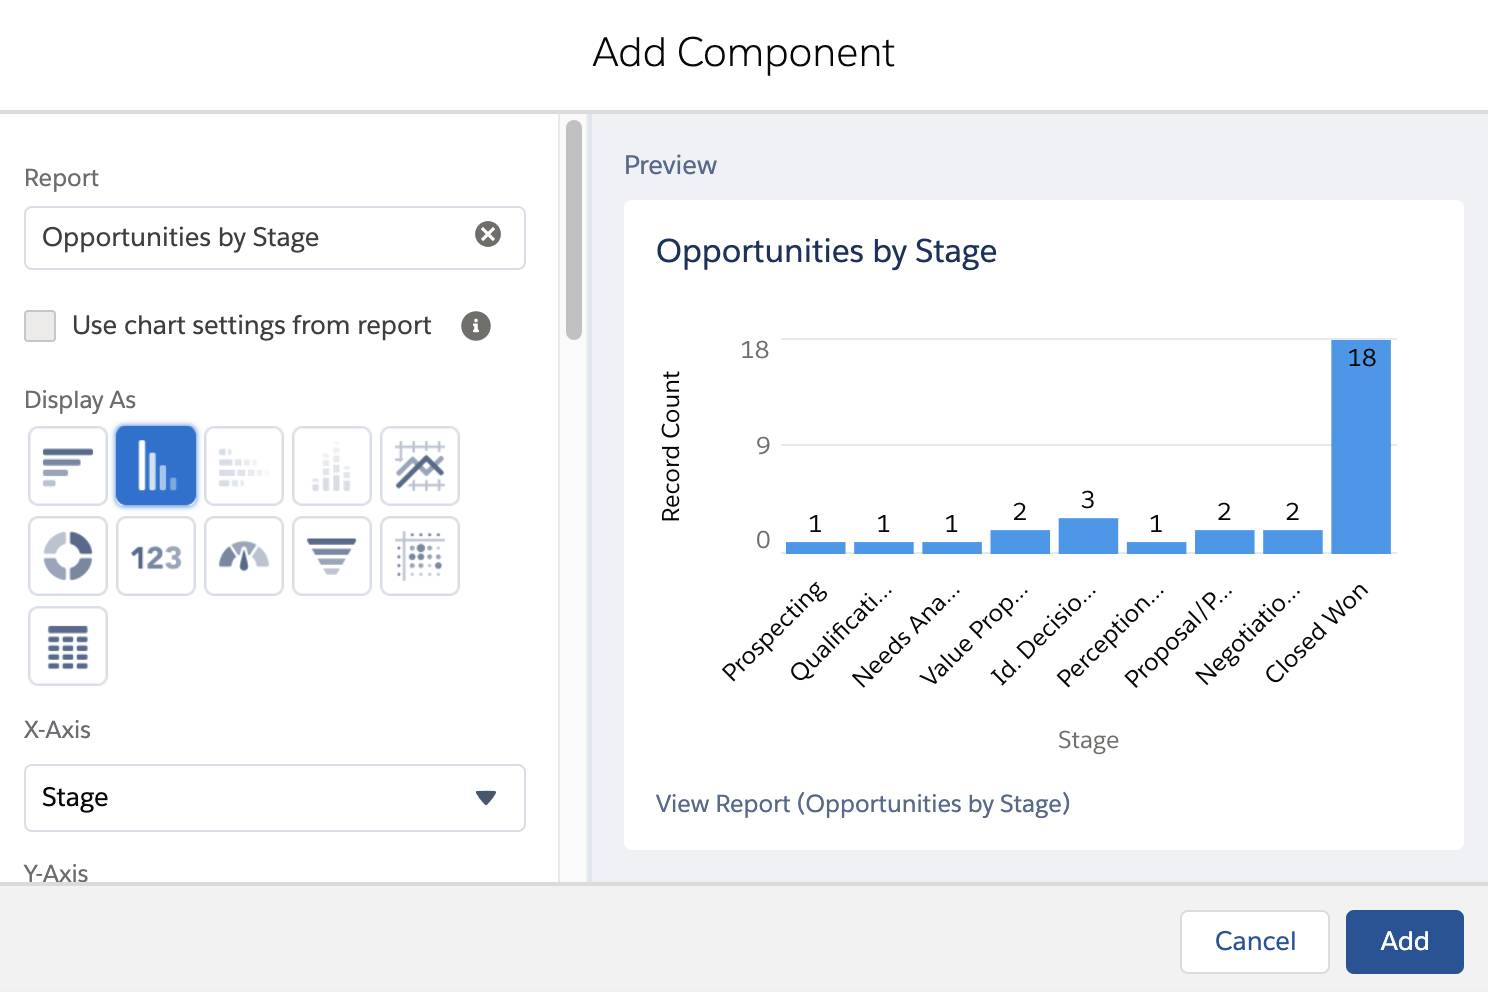  The dashboard editor contains component types under the Display As section. For this project choose the vertical bar chart component. The report field should contain the report you created in this project, titled Opportunities by Stage. Click the Add button to add the component.